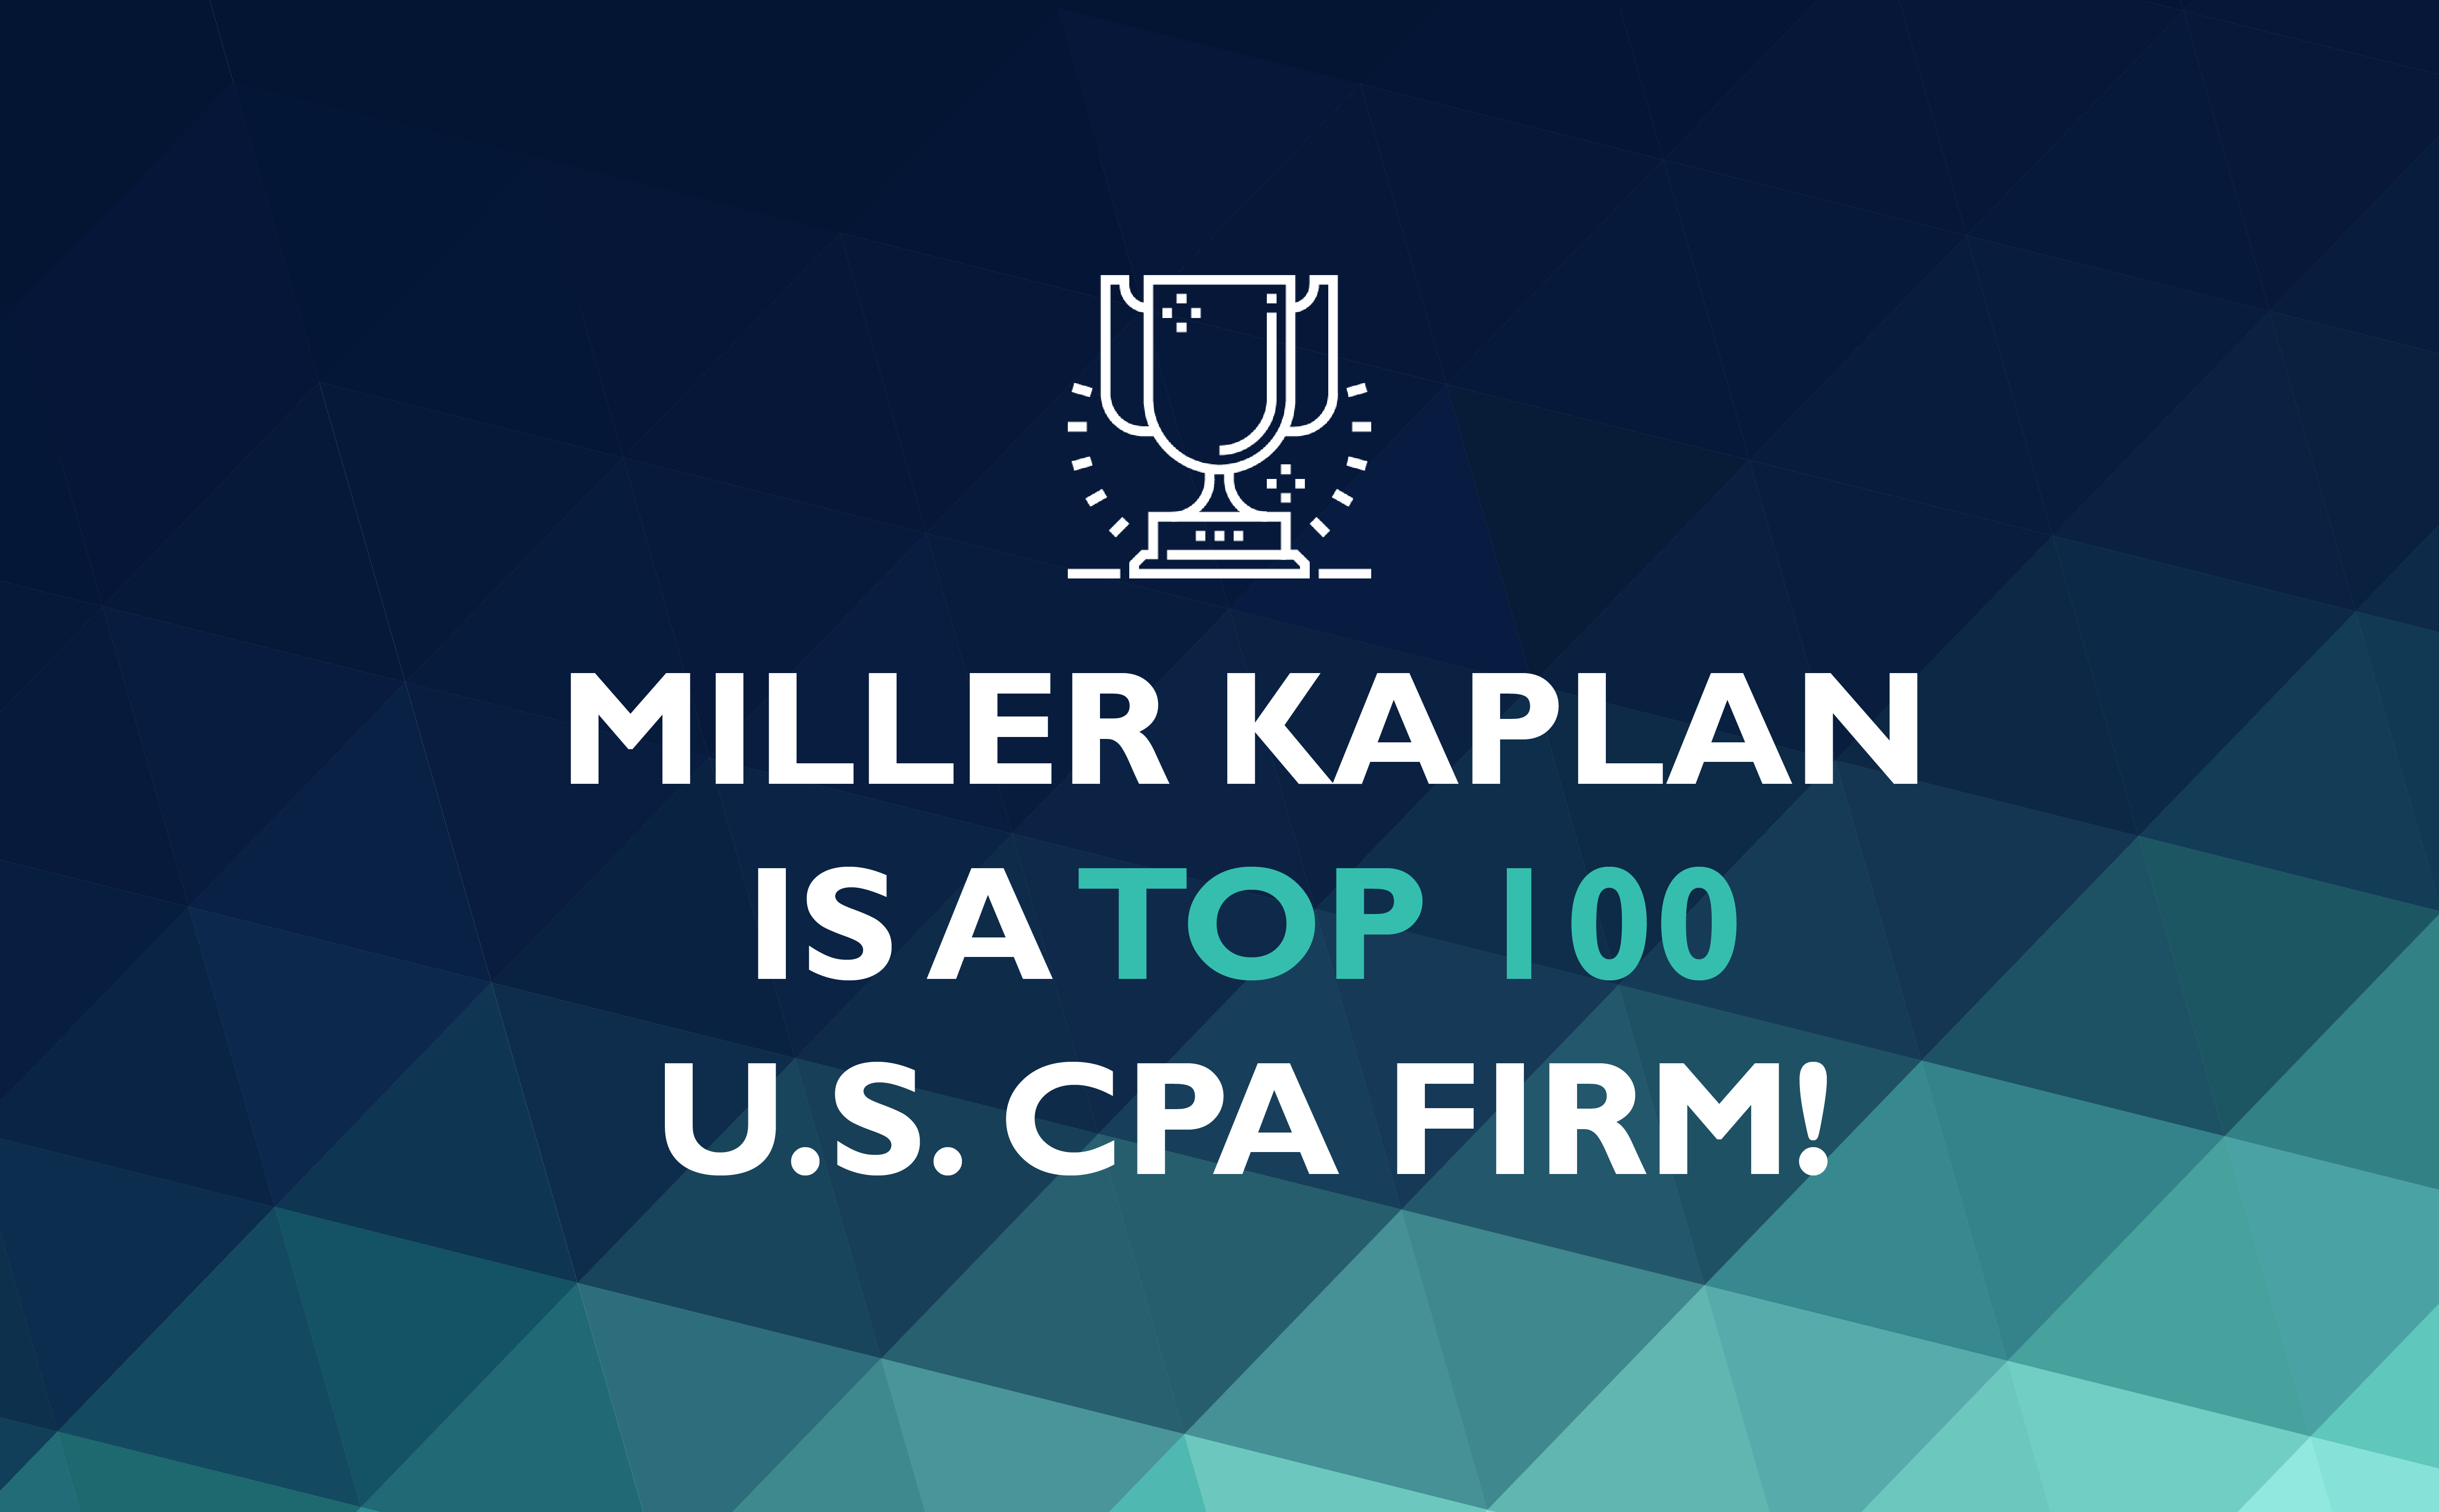 Miller Kaplan Named Top 100 Firm | Accounting Today